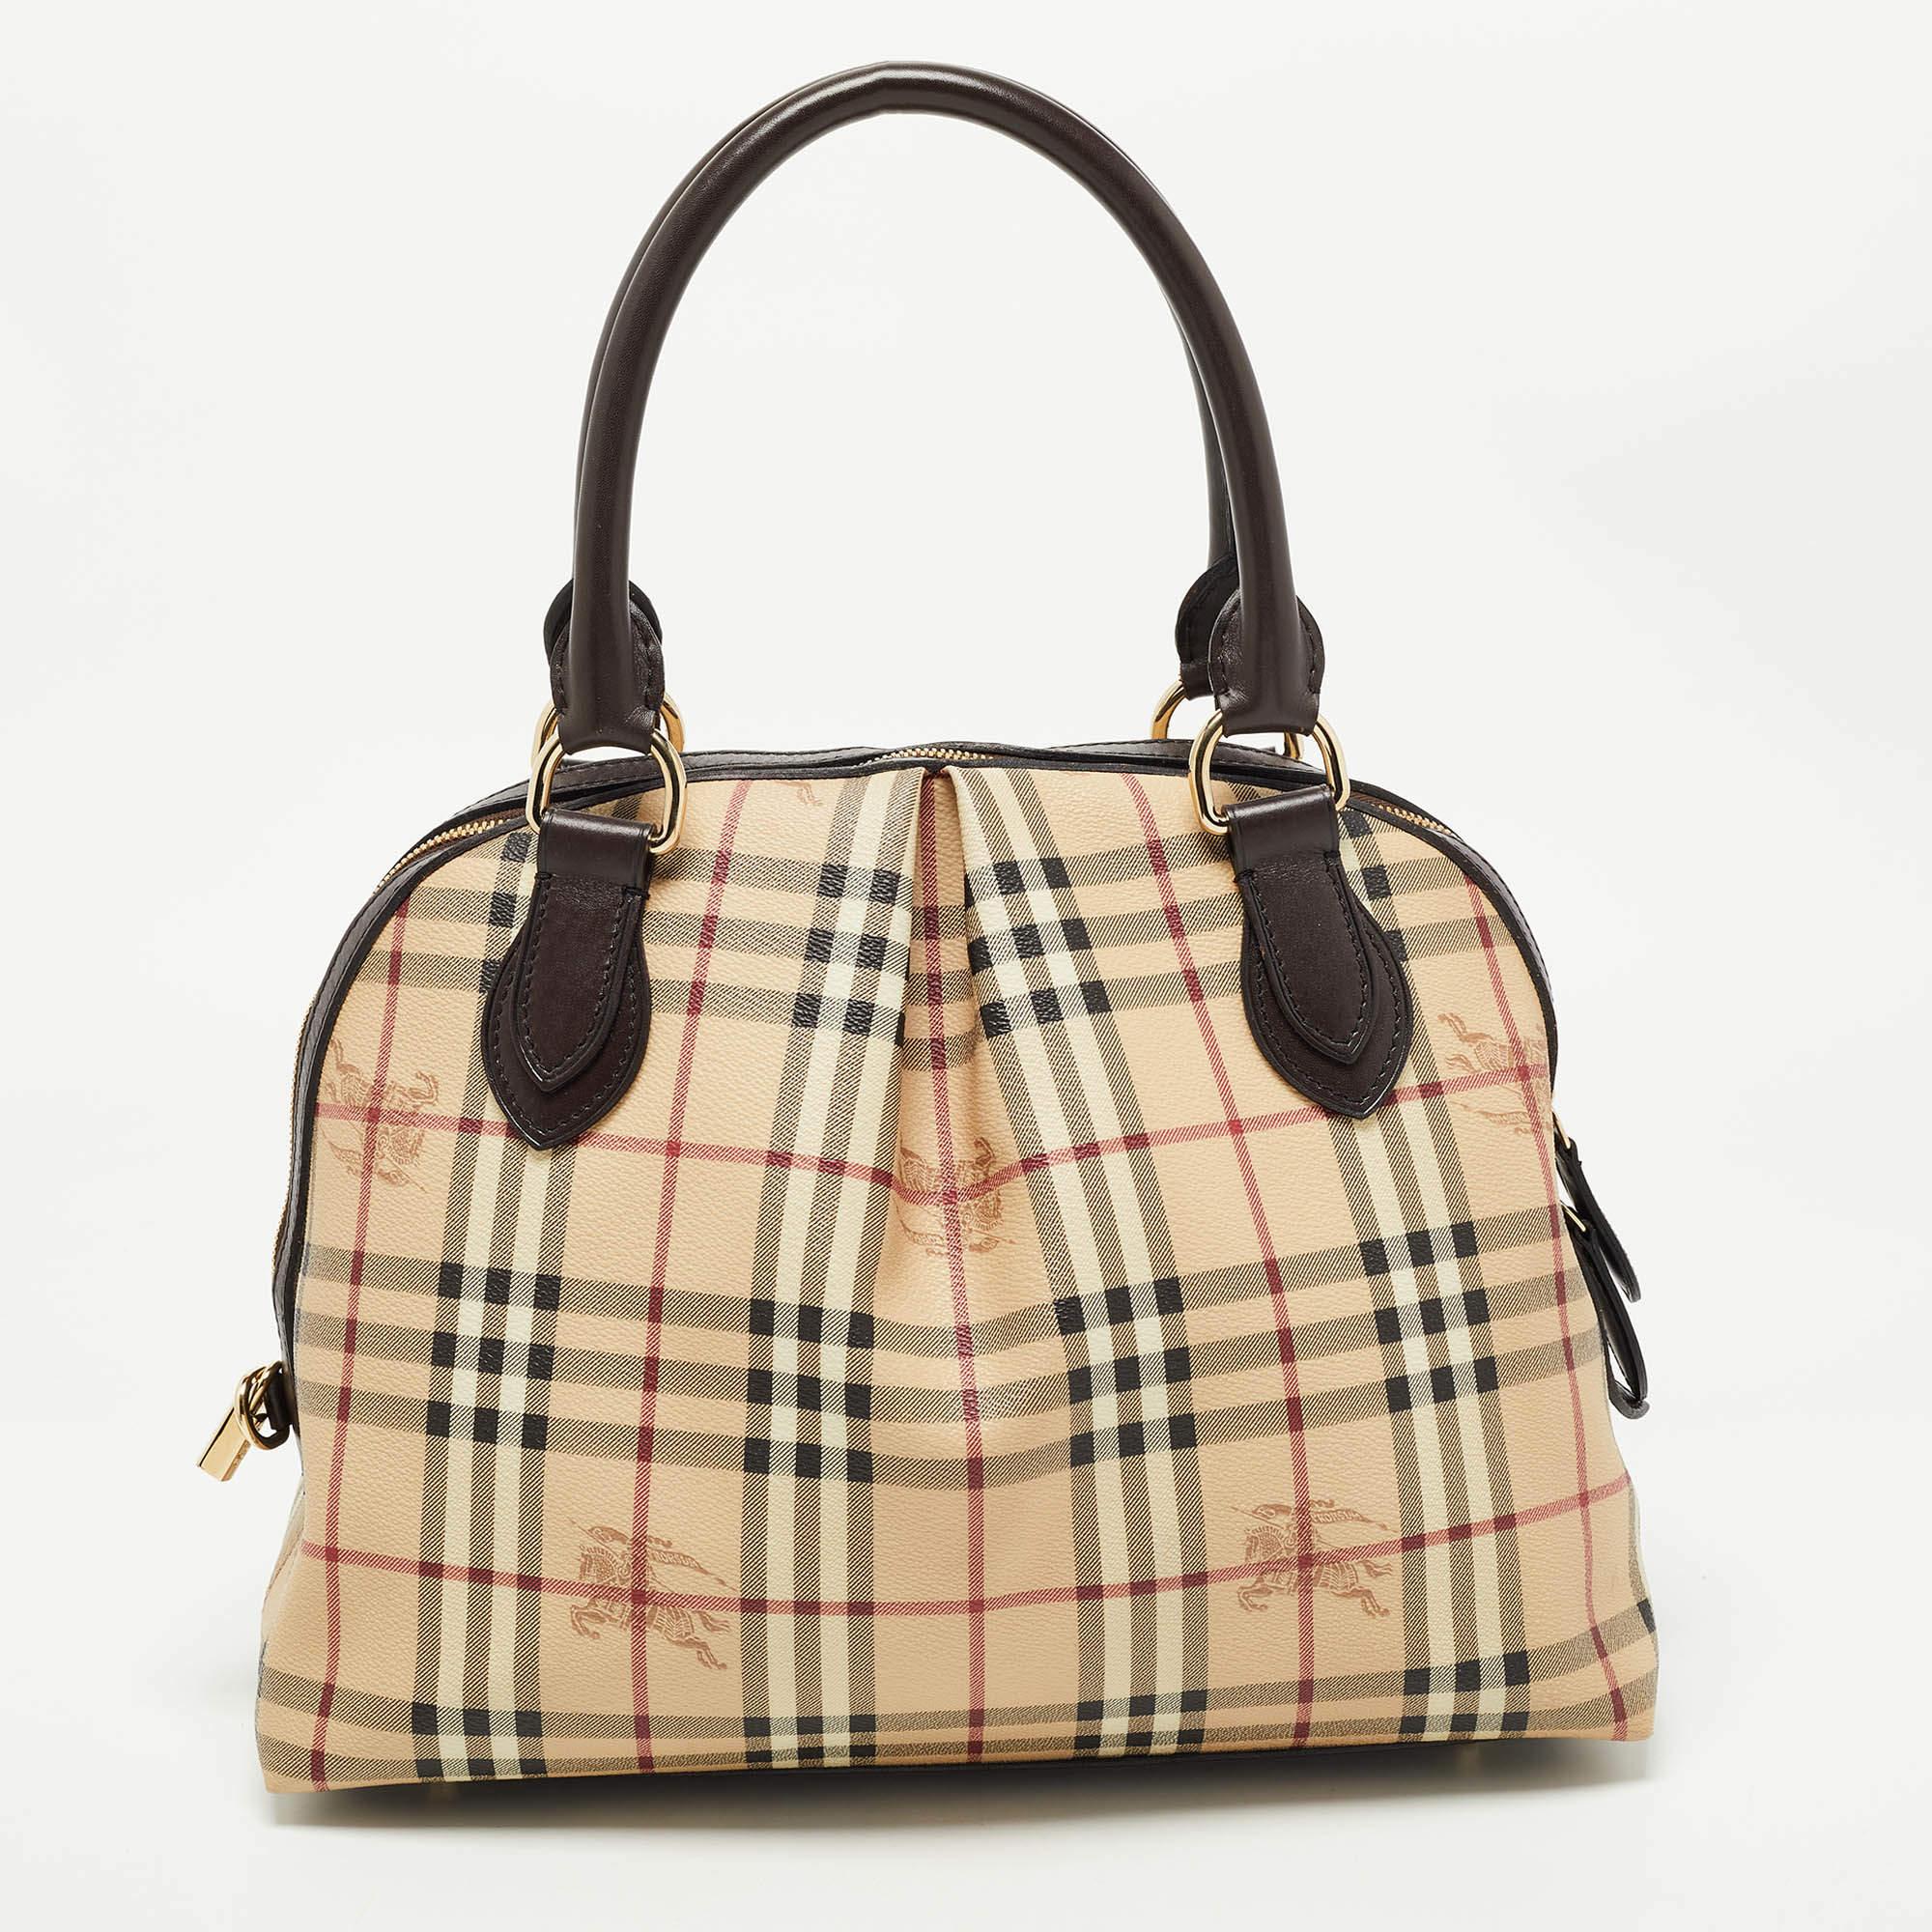 Spacious and captivating, this Thornley satchel is from Burberry. It has been crafted from their signature Haymarket check PVC and accented with leather trims and gold-tone hardware. It comes with dual-rolled handles and the zip-top closure opens to